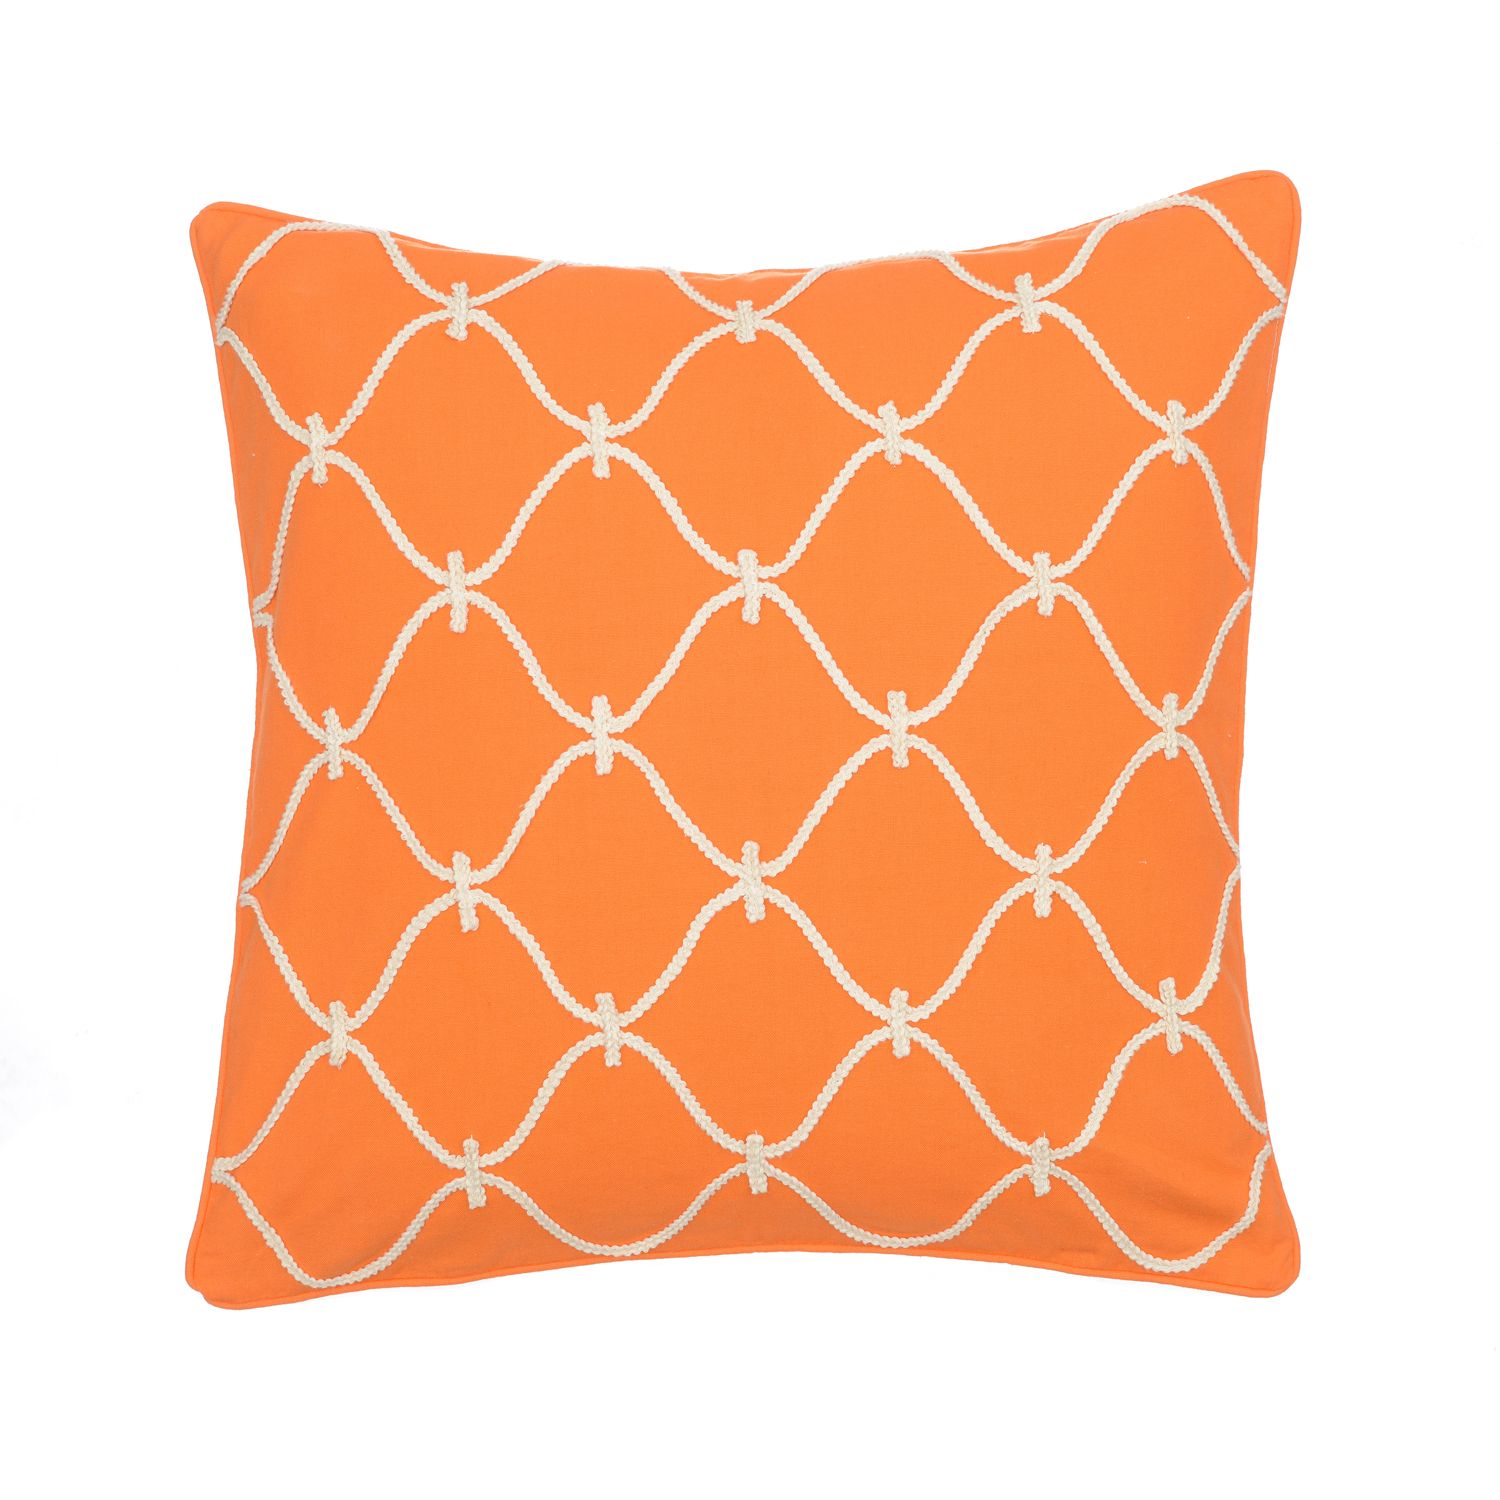 Image for Levtex Home Serendipity Rope Decorative Pillow at Kohl's.